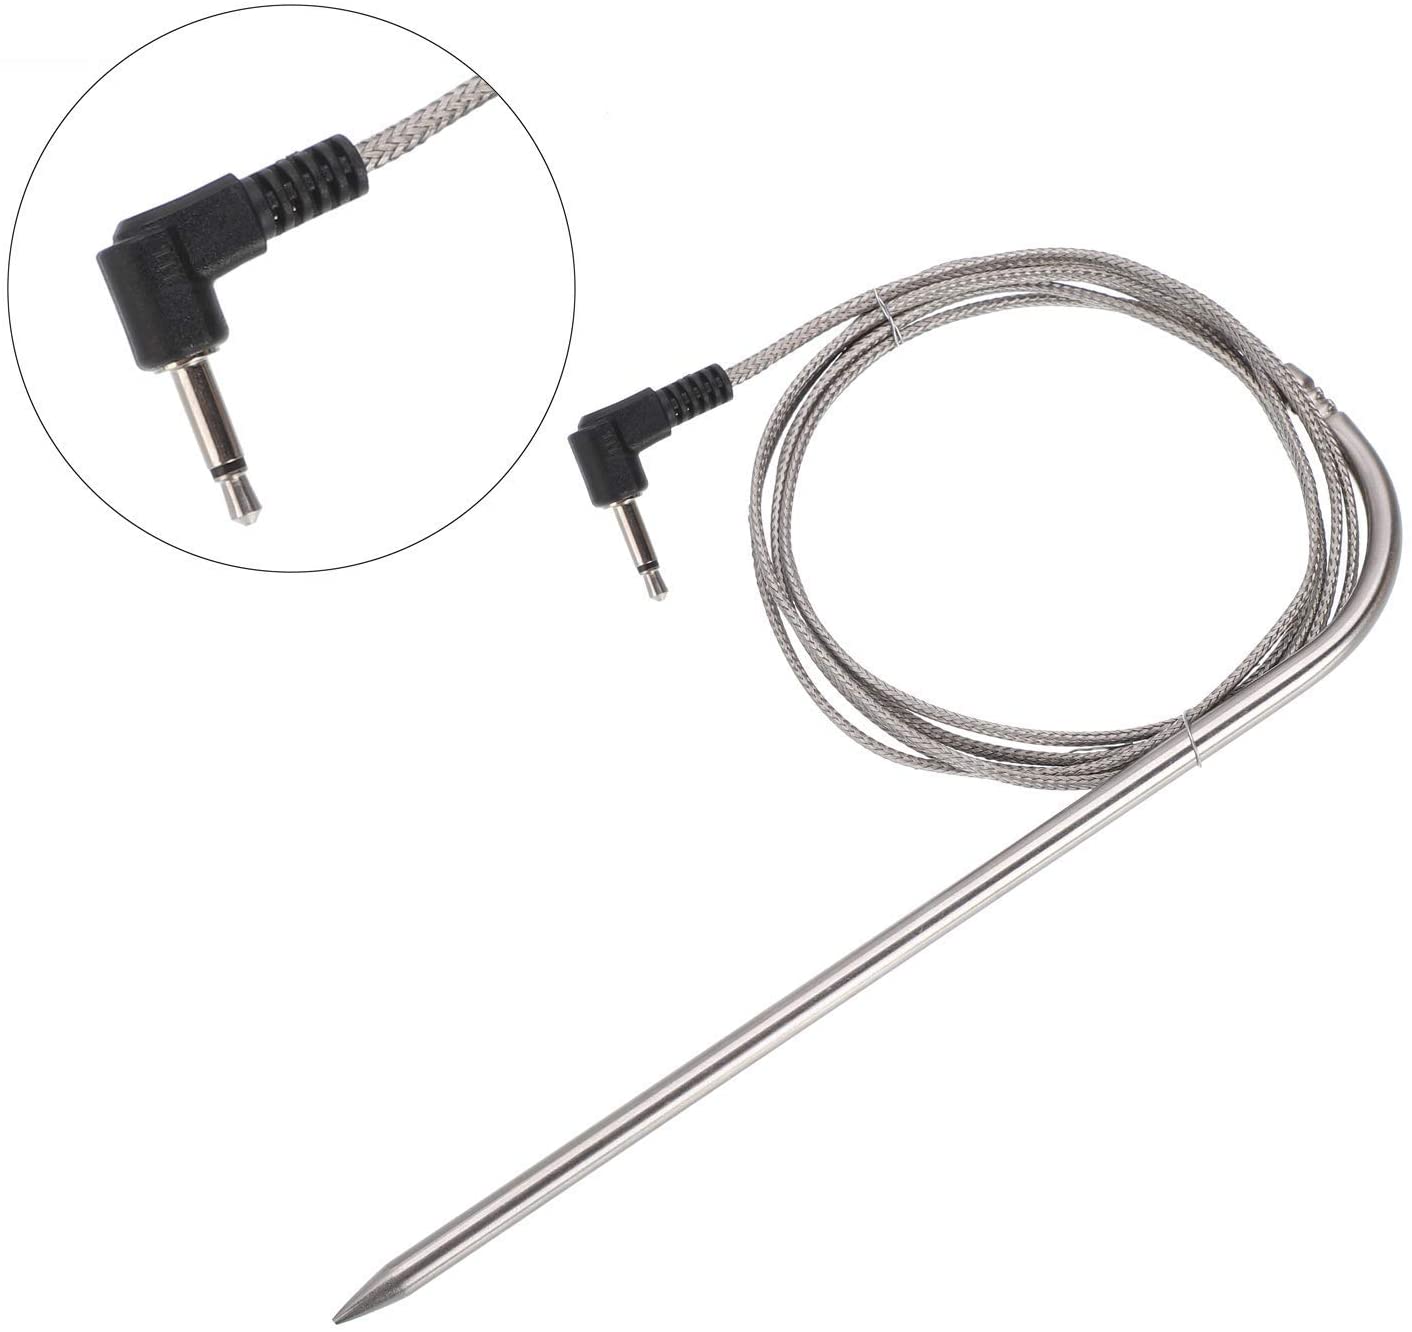 2 Pack Meat Probe Replacement For Thermometers Tp20 Tp17 Tp16